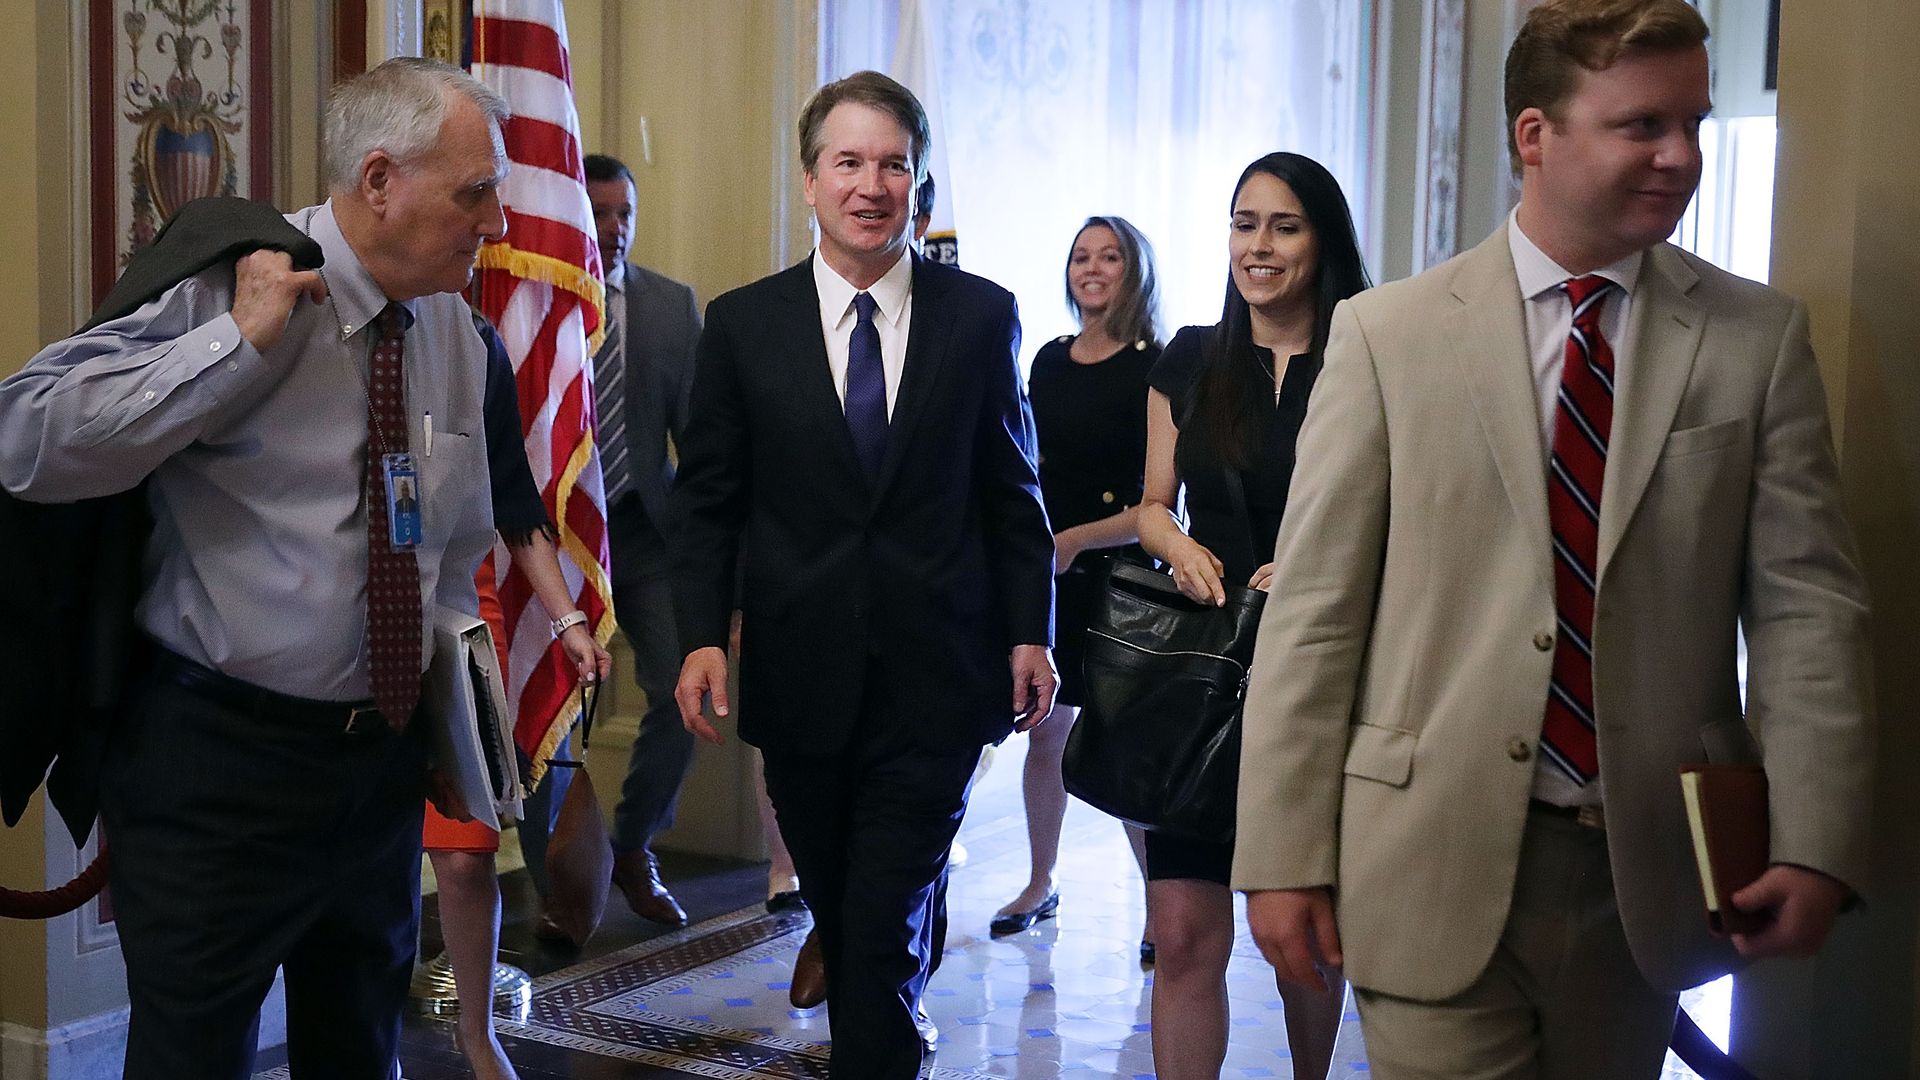 Brett Kavanaugh arrives on the Hill with a smile on his face